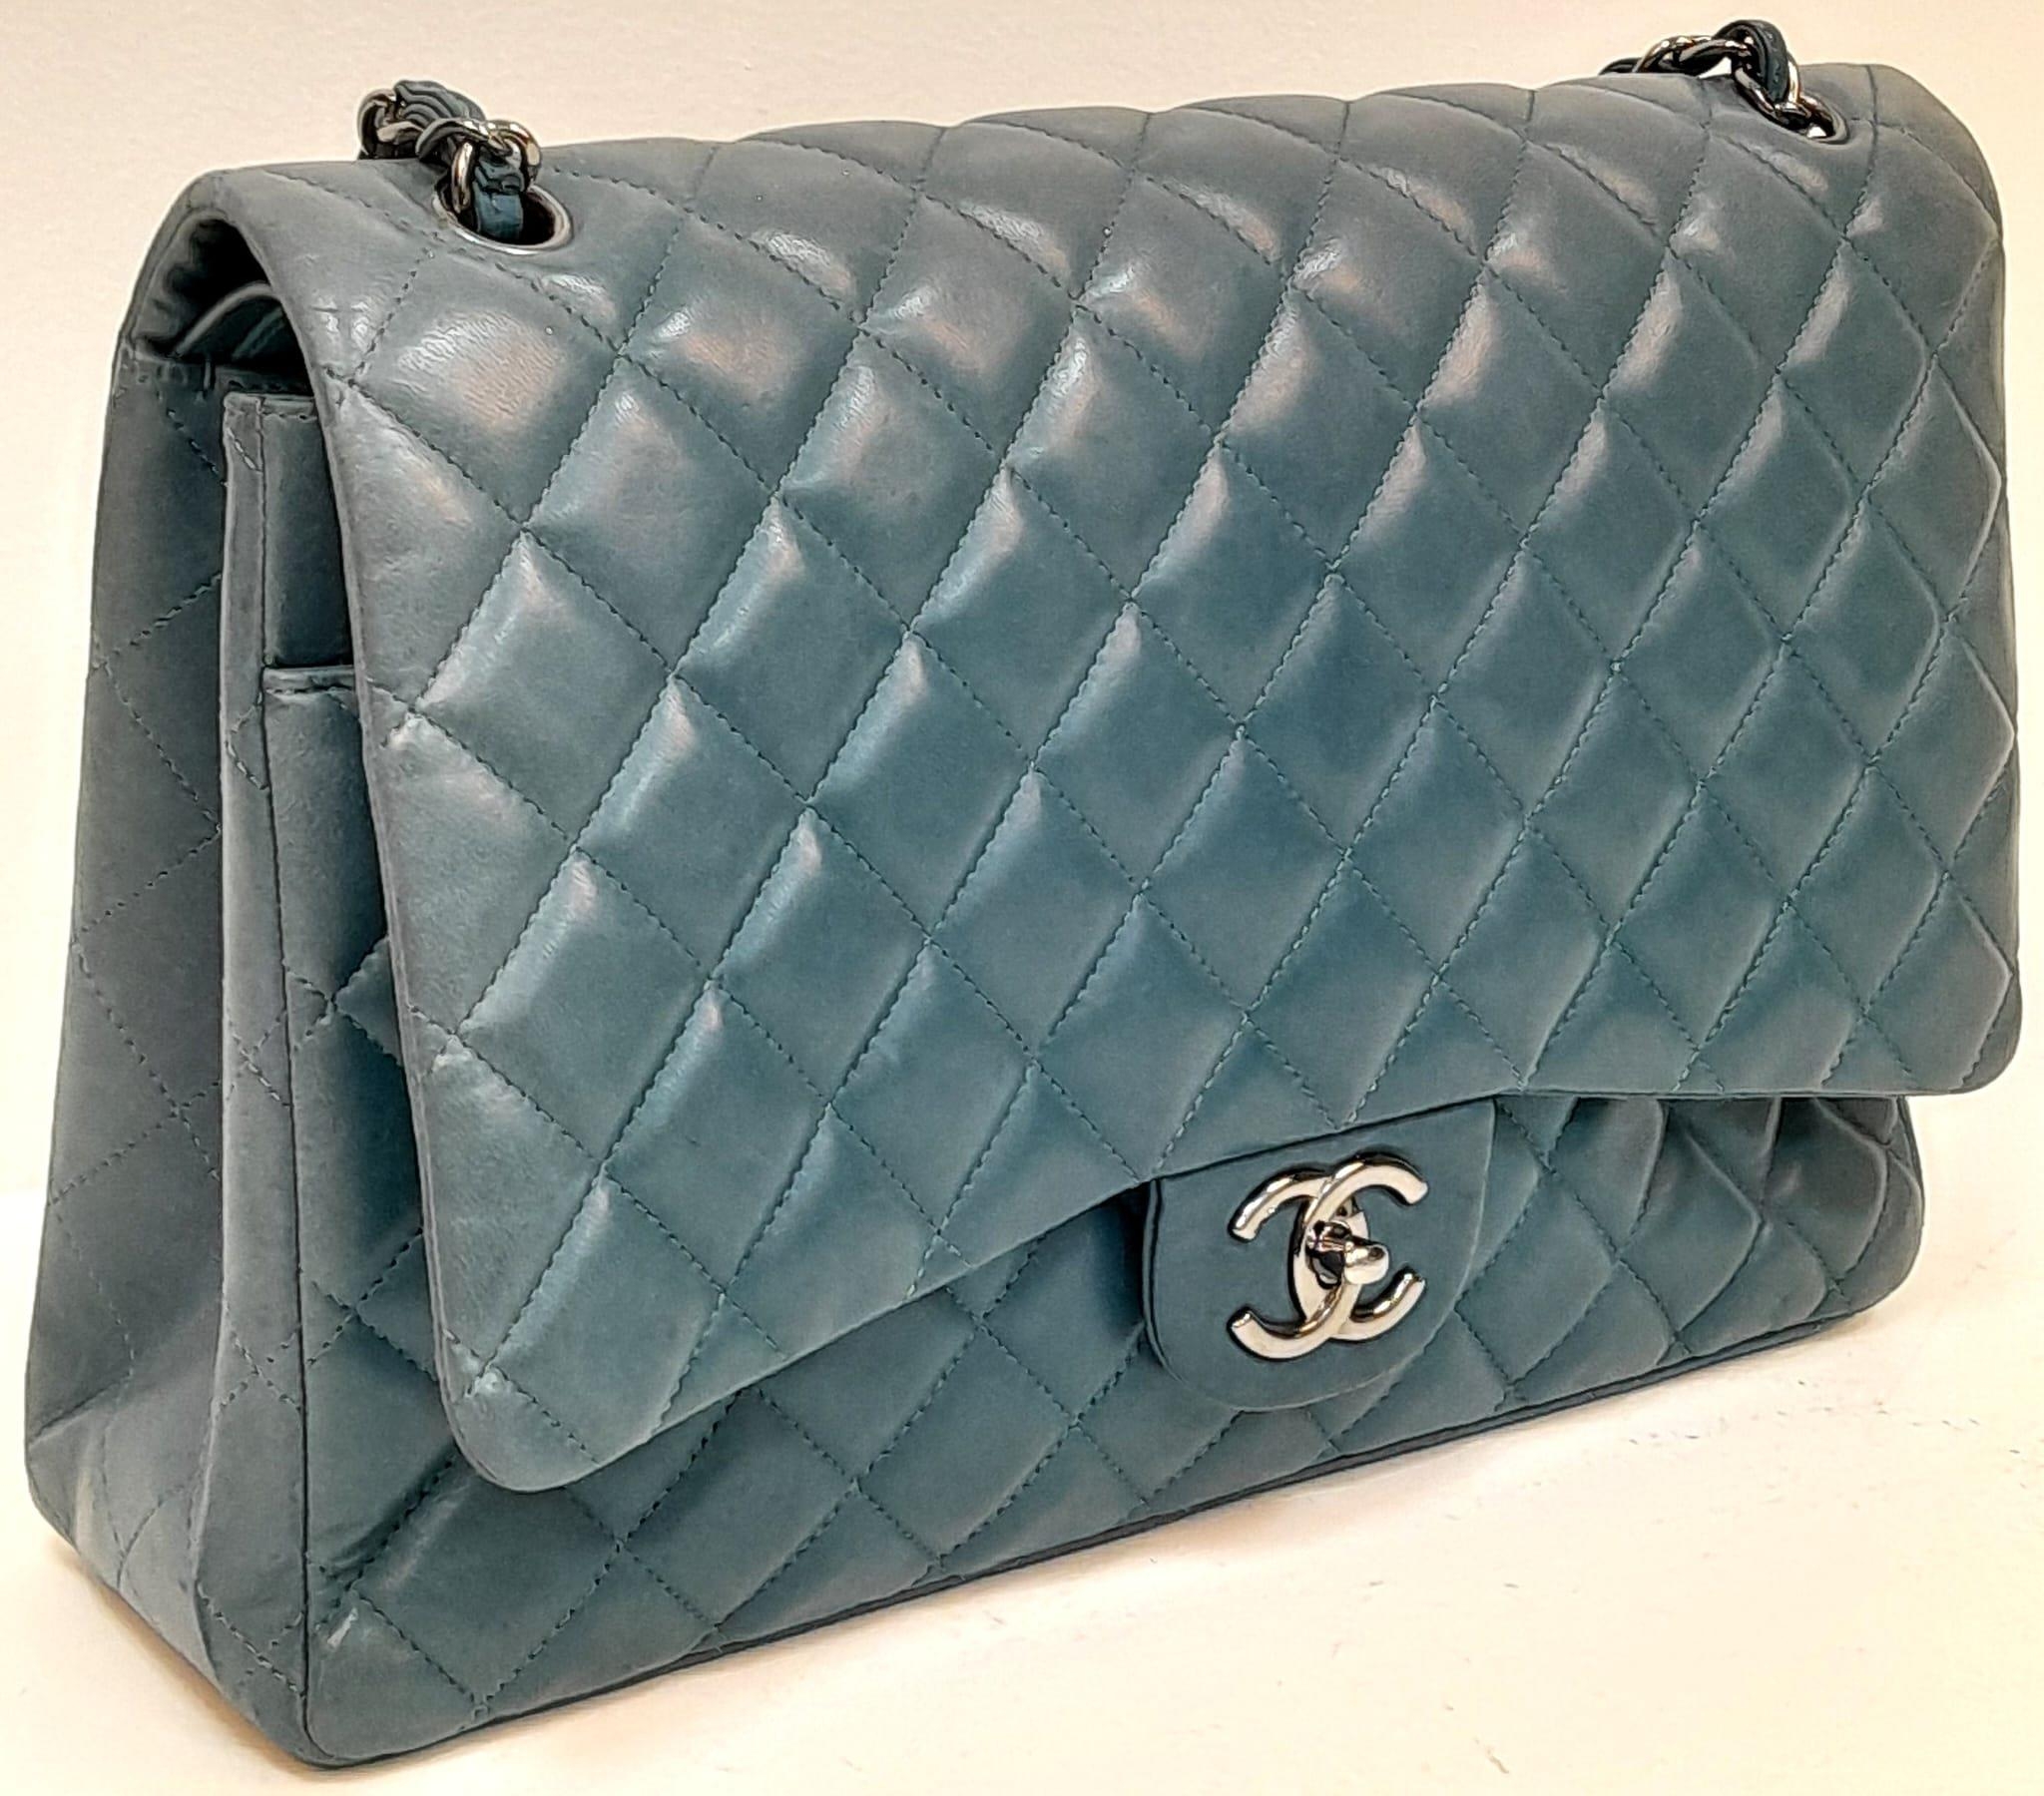 A Chanel Teal Jumbo Classic Double Flap Bag. Quilted leather exterior with silver-toned hardware, - Image 3 of 14